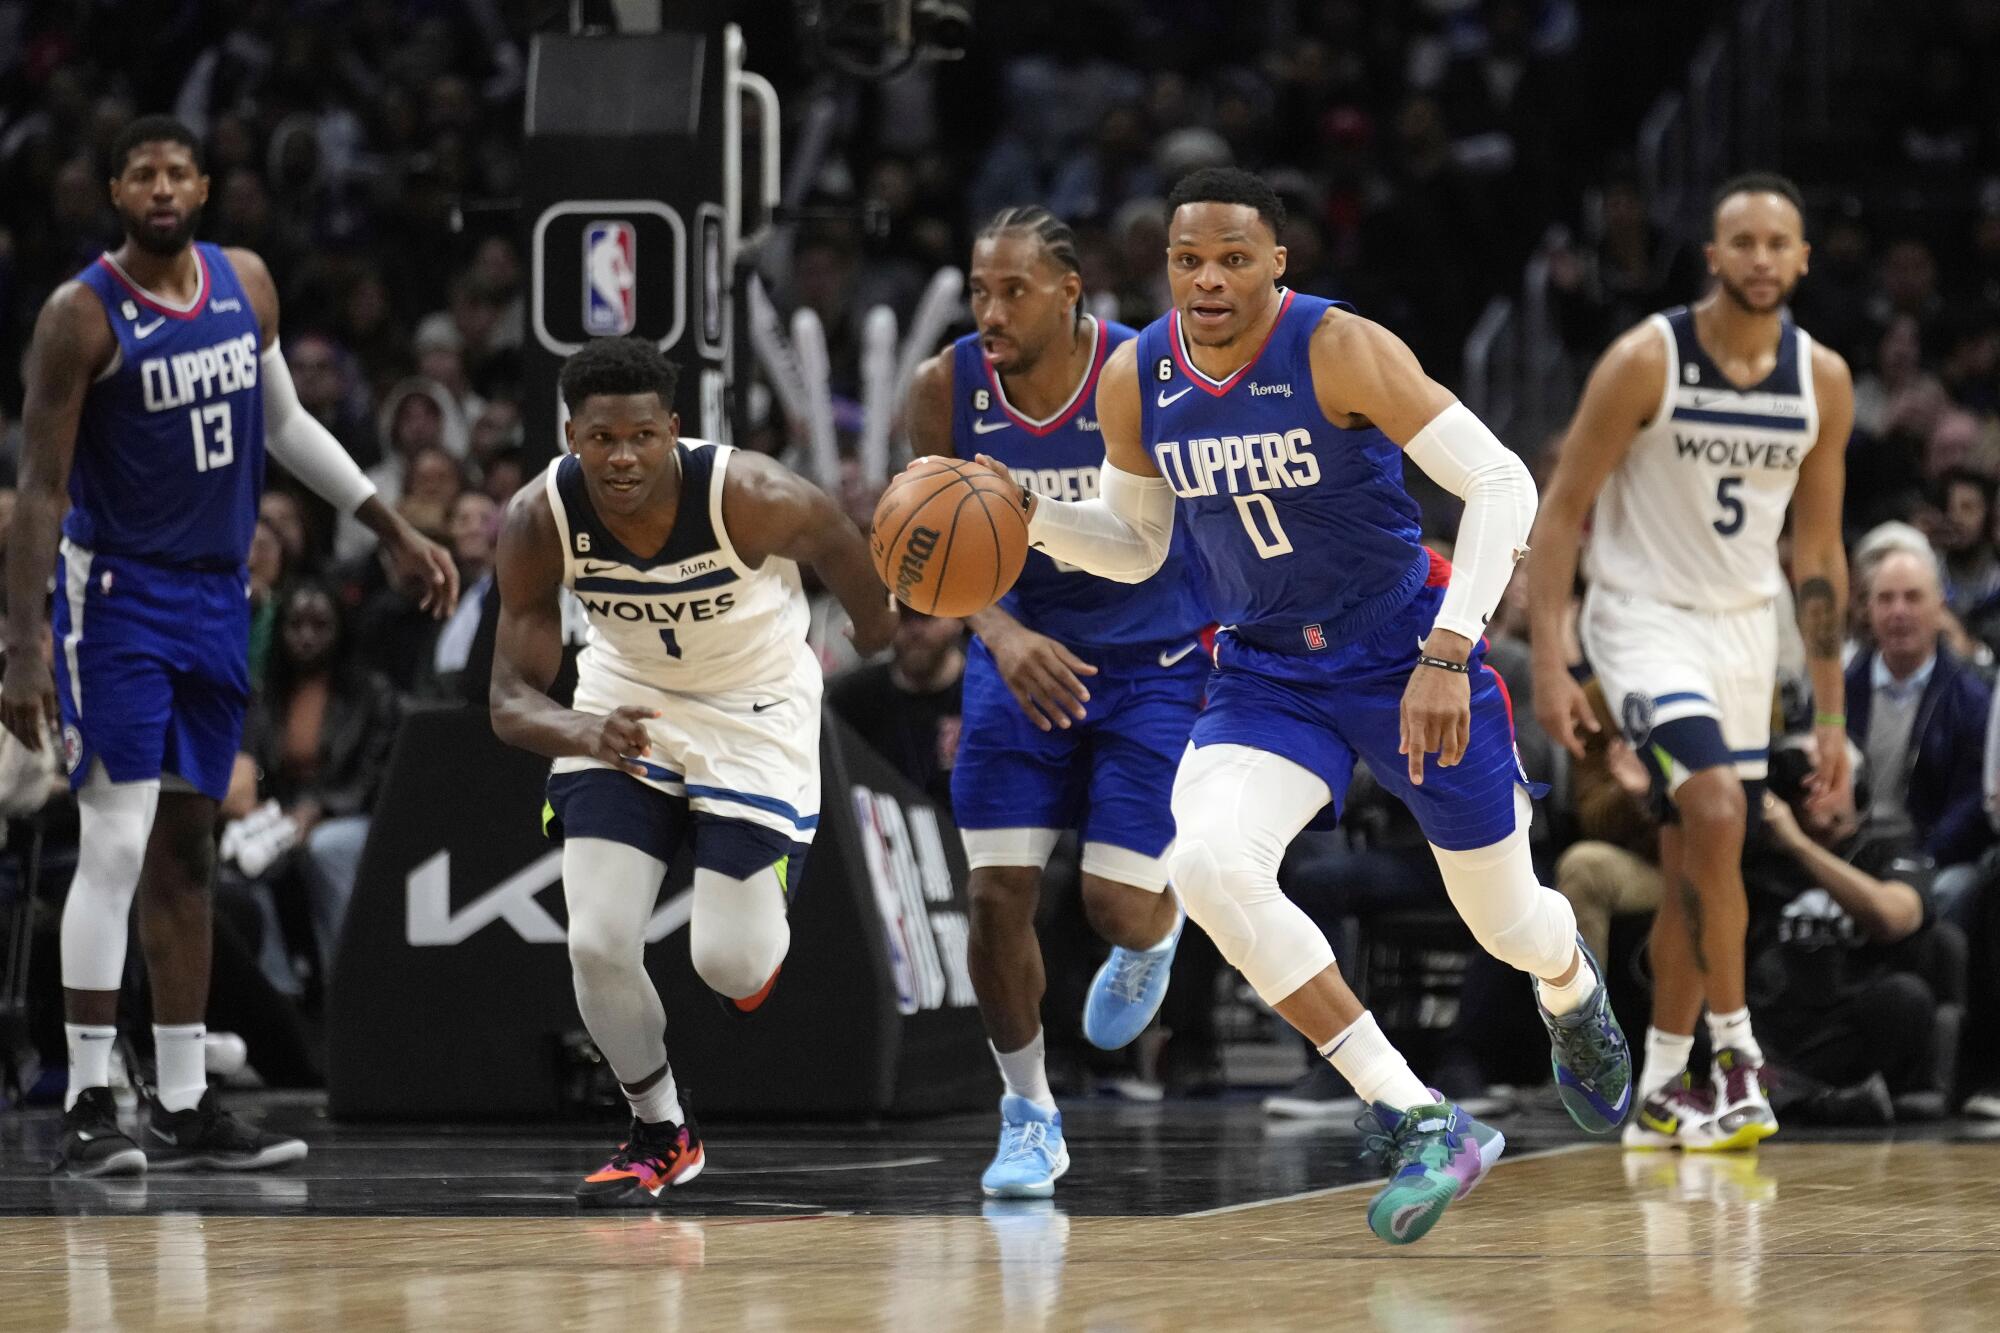 Clippers point guard Russell Westbrook brings the ball up during a fast break against the Minnesota Timberwolves.